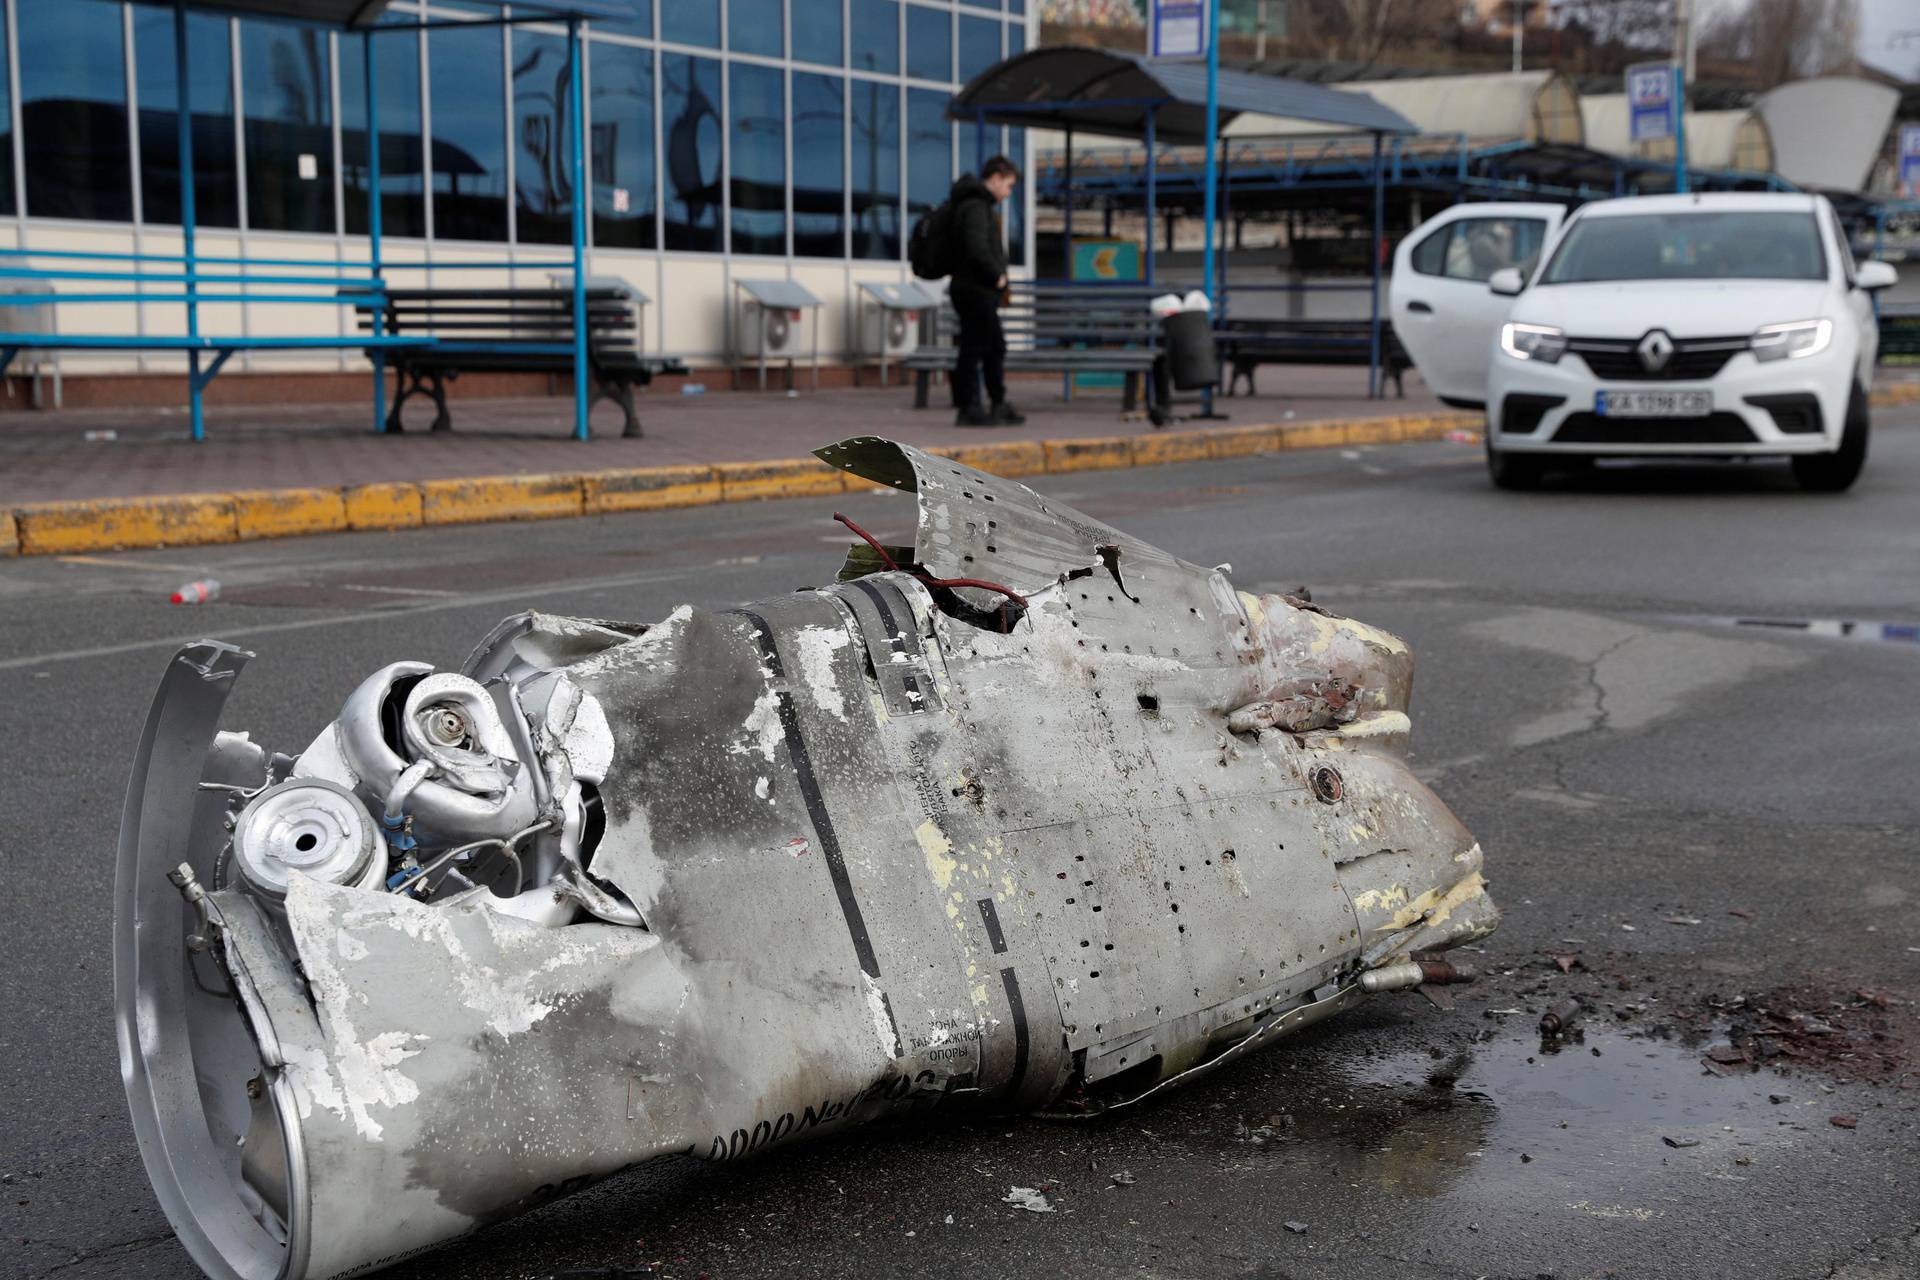 A view shows the remains of a missile at a bus terminal in Kyiv